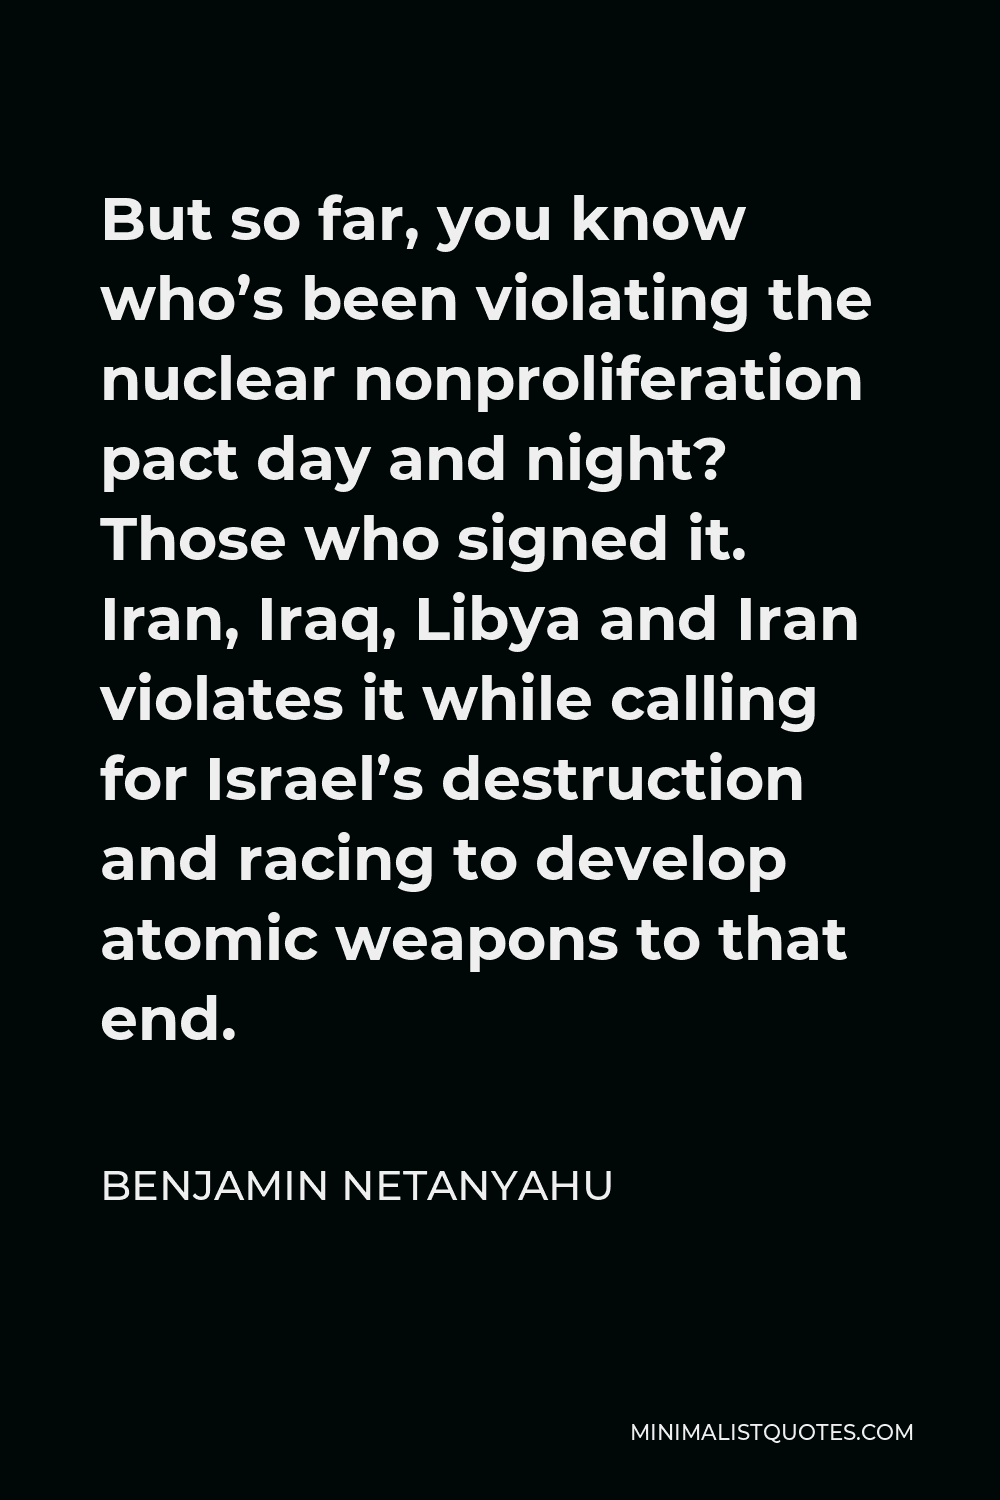 Benjamin Netanyahu Quote - But so far, you know who’s been violating the nuclear nonproliferation pact day and night? Those who signed it. Iran, Iraq, Libya and Iran violates it while calling for Israel’s destruction and racing to develop atomic weapons to that end.